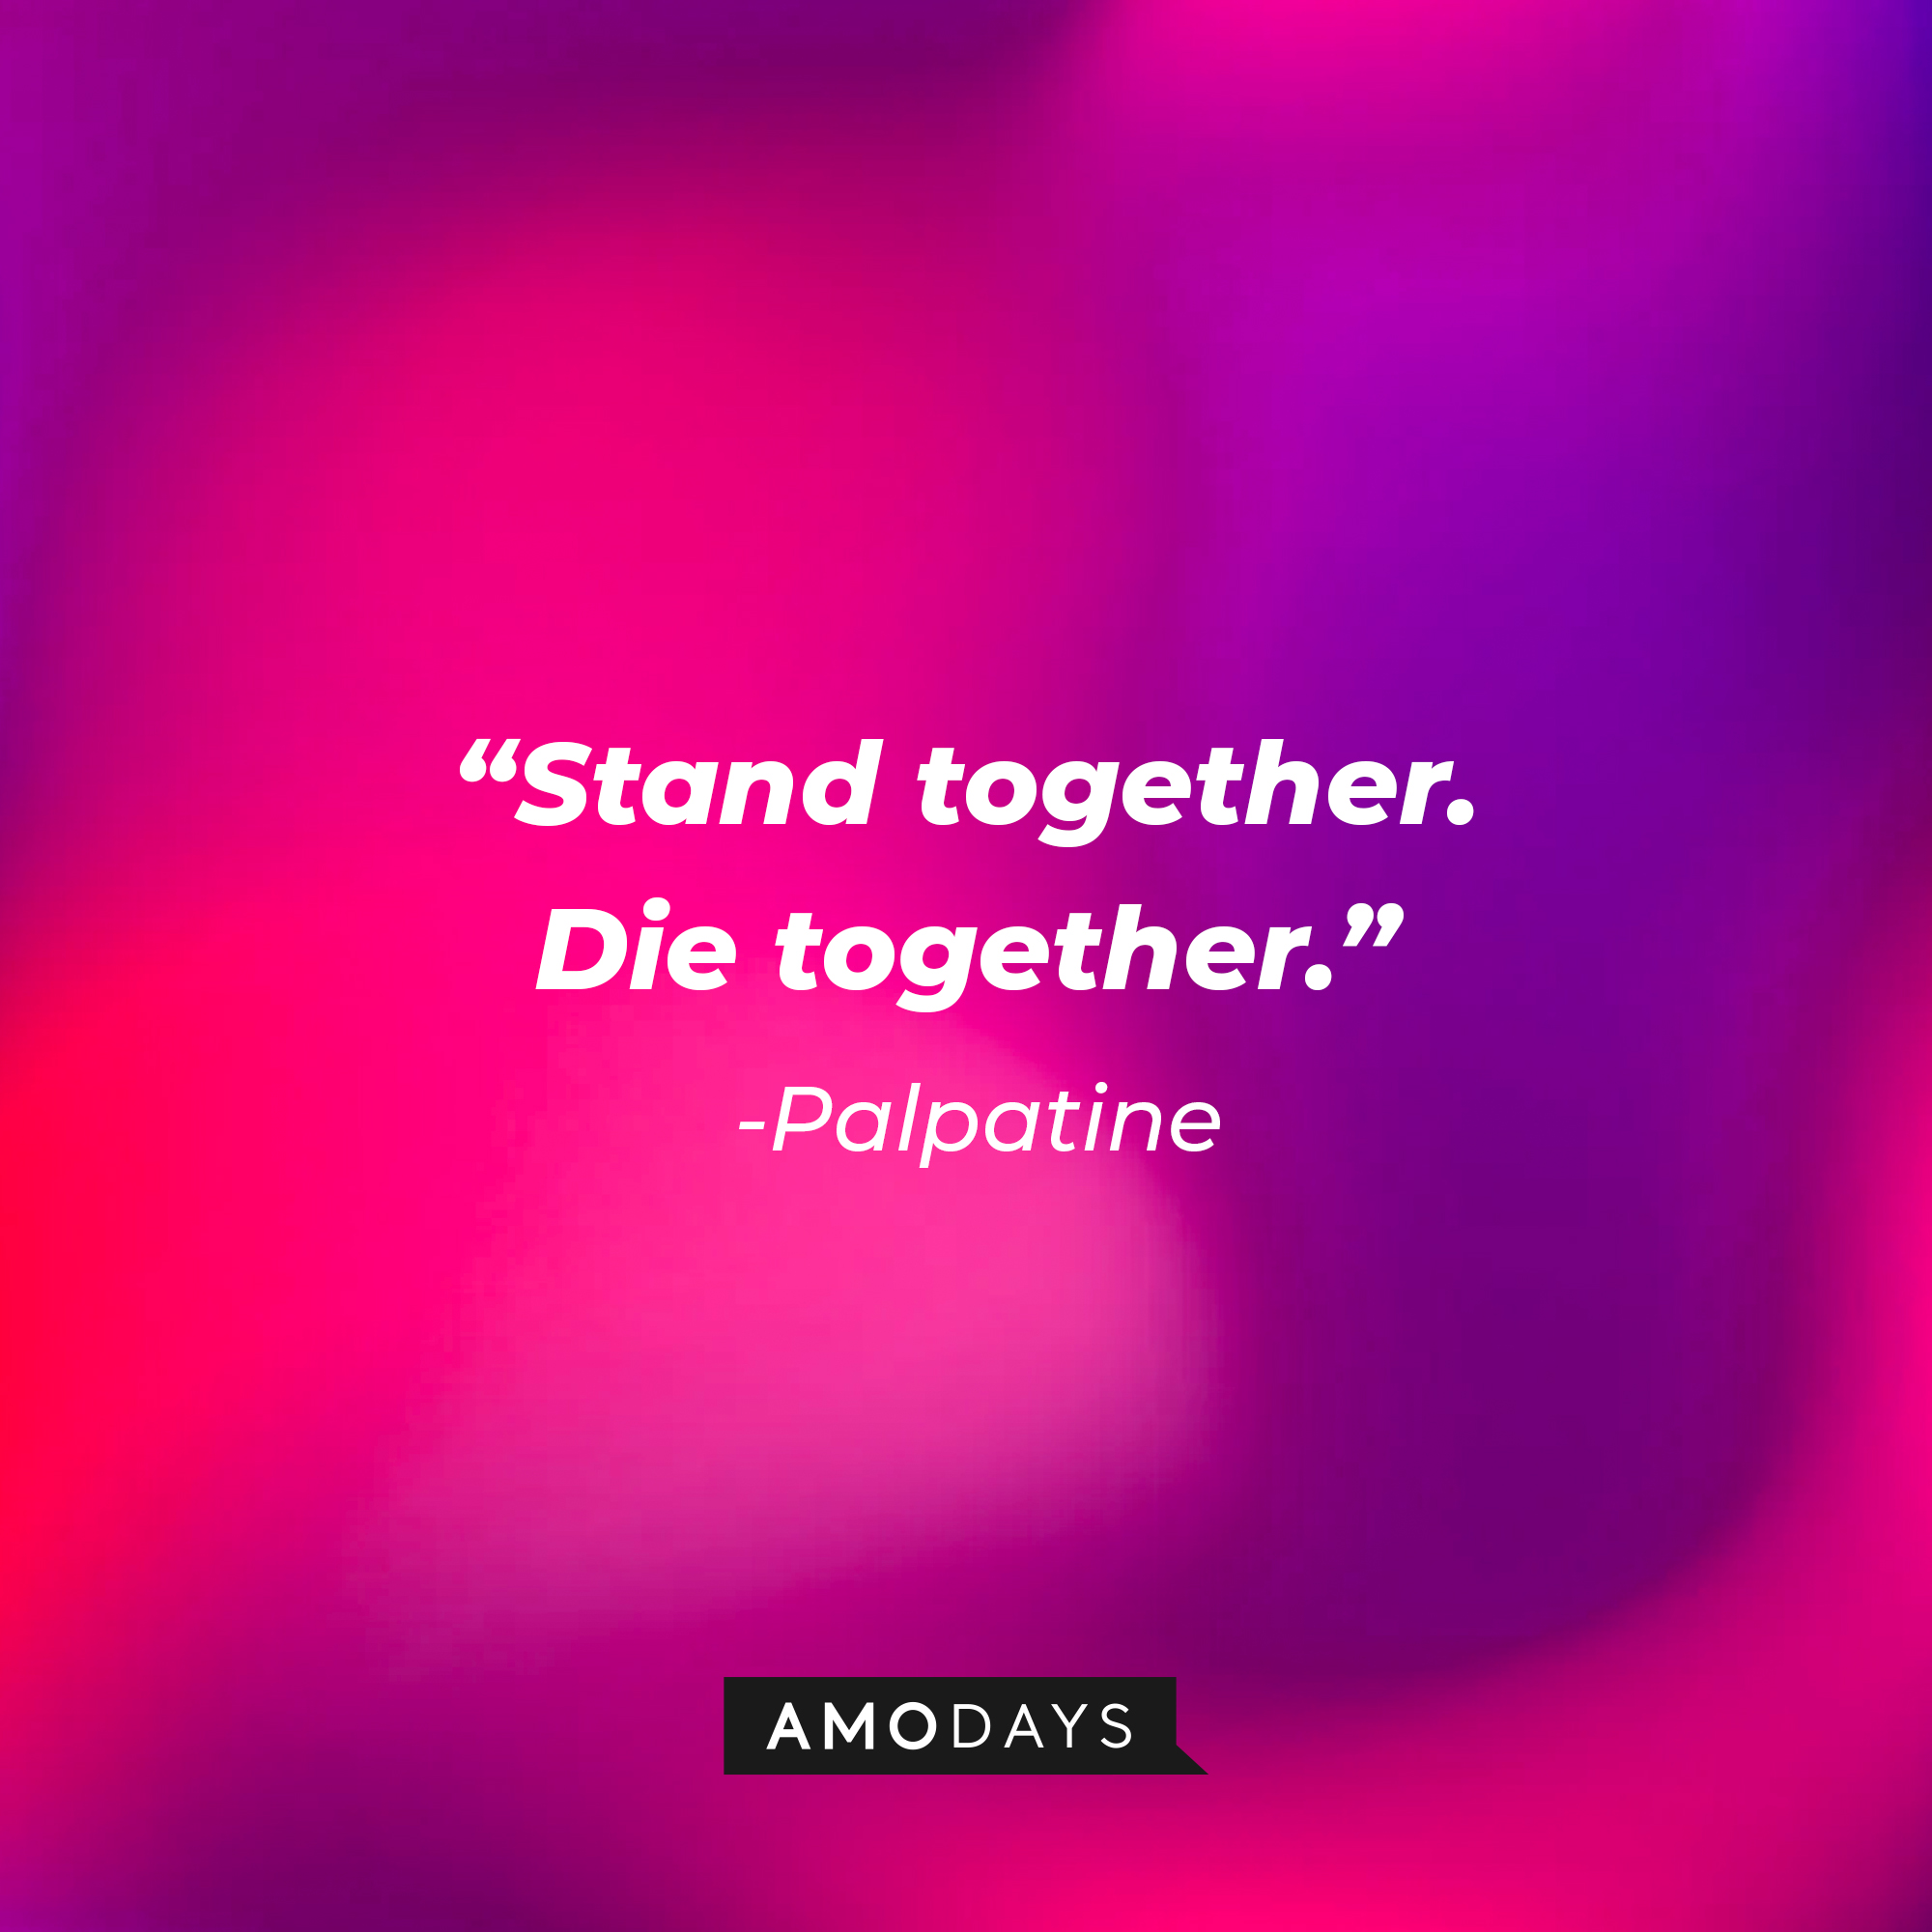 Palpatine’s quote: “Stand together. Die together.” | Source: AmoDays